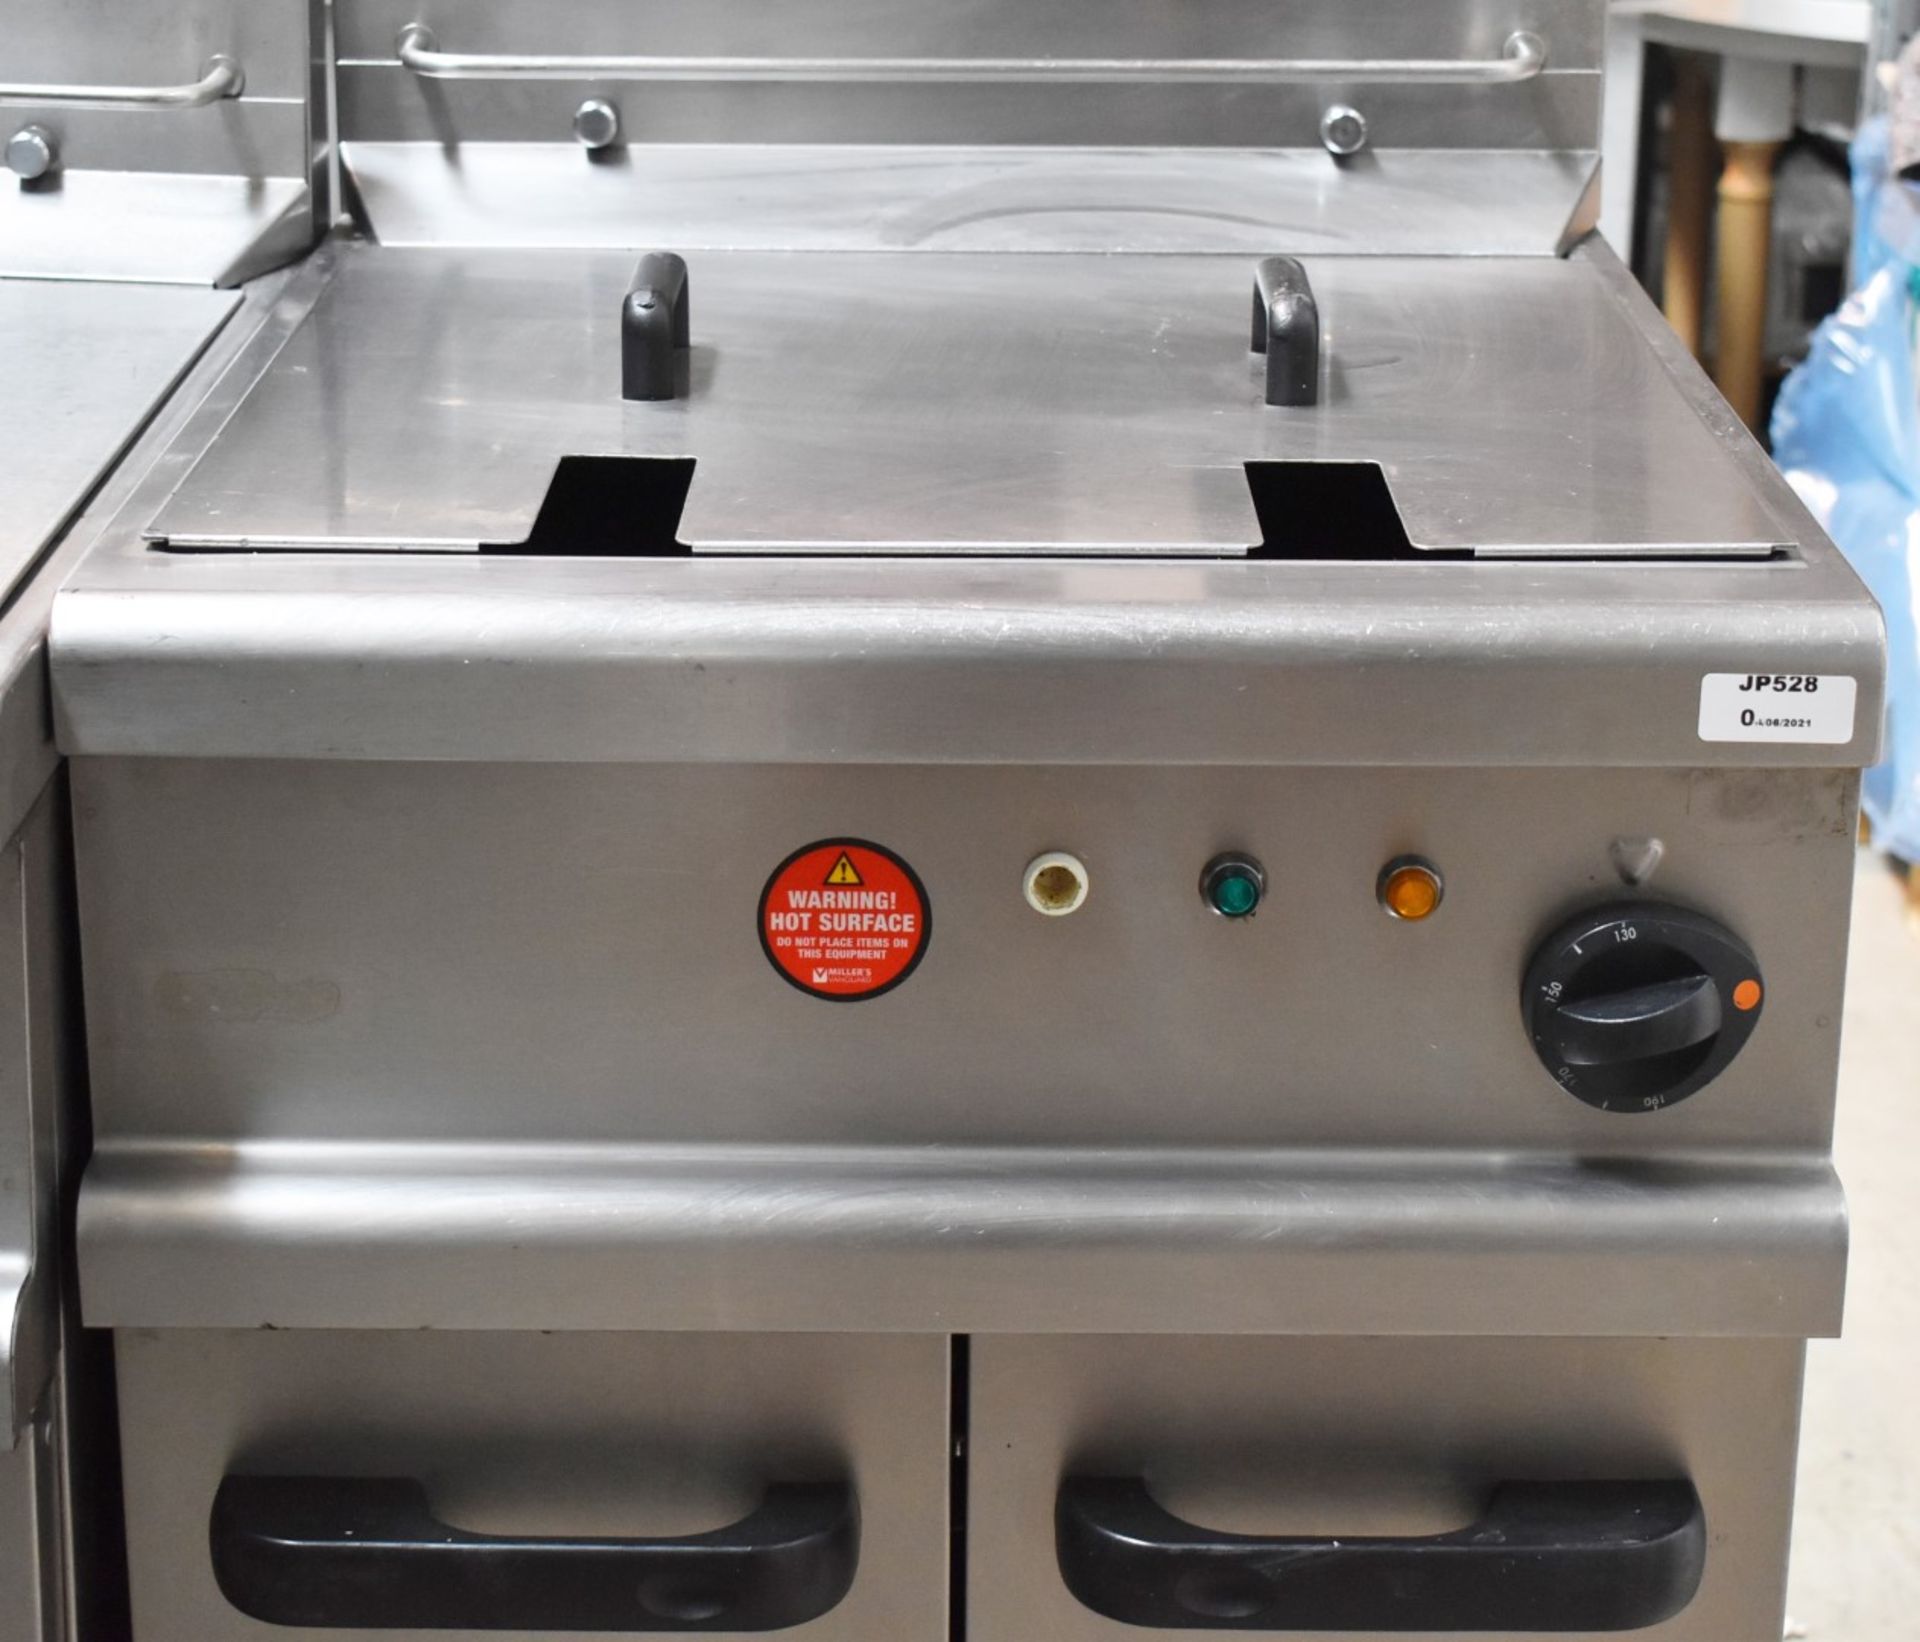 1 x Lincat Opus 700 OE7113 Single Large Tank Electric Fryer With Built In Filteration - 240V / 3PH P - Image 3 of 12